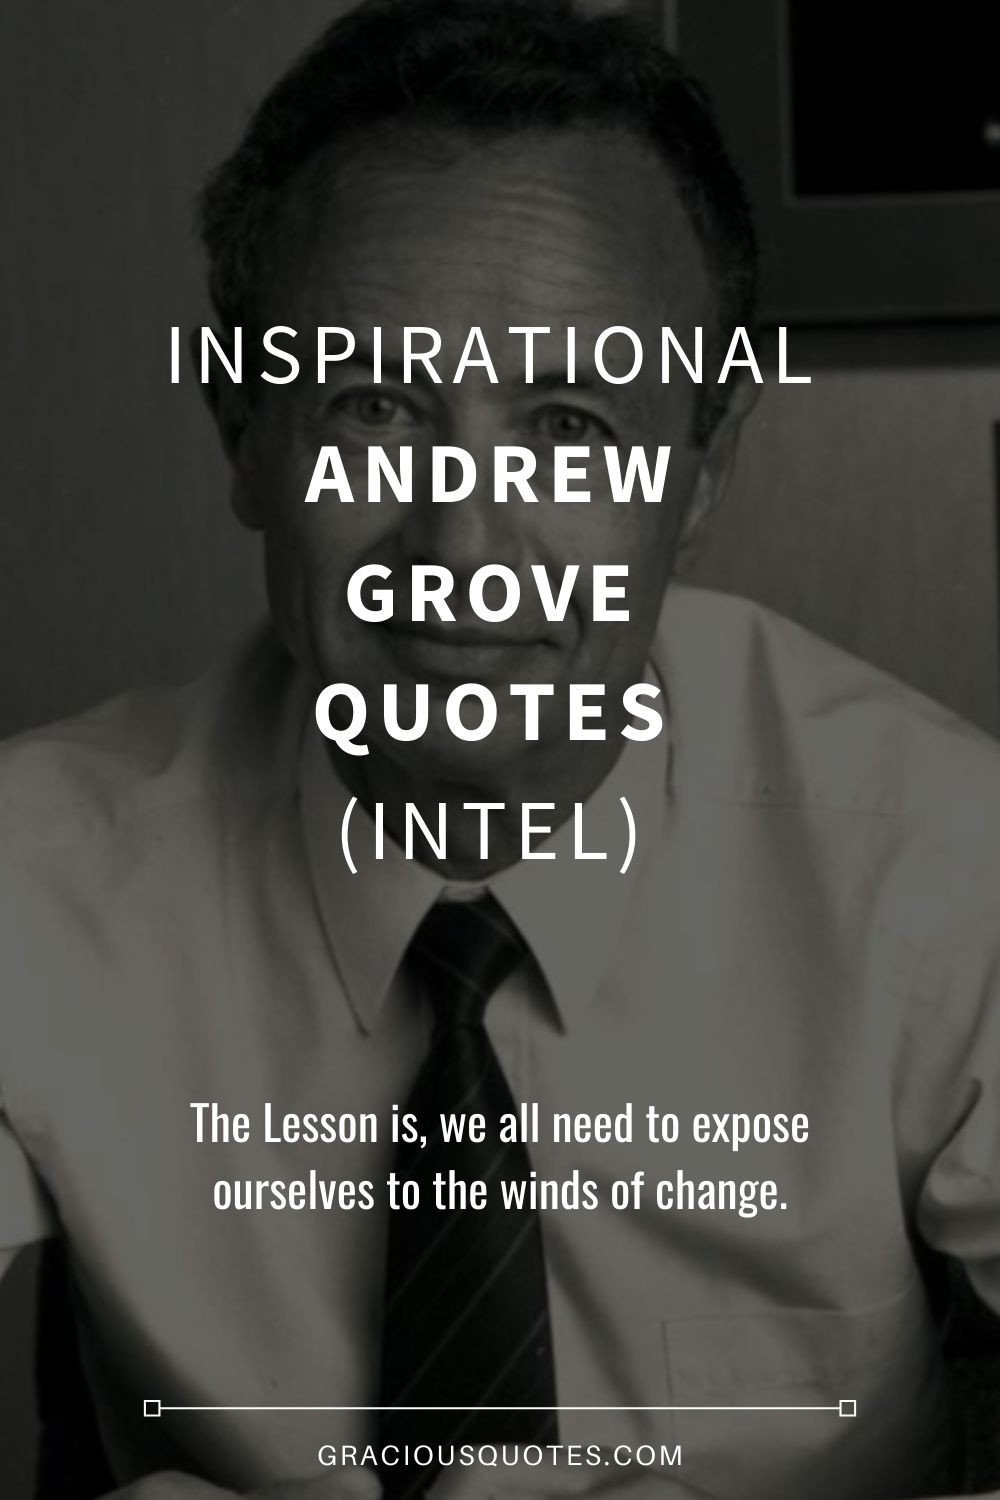 Inspirational Andrew Grove Quotes (INTEL) - Gracious Quotes